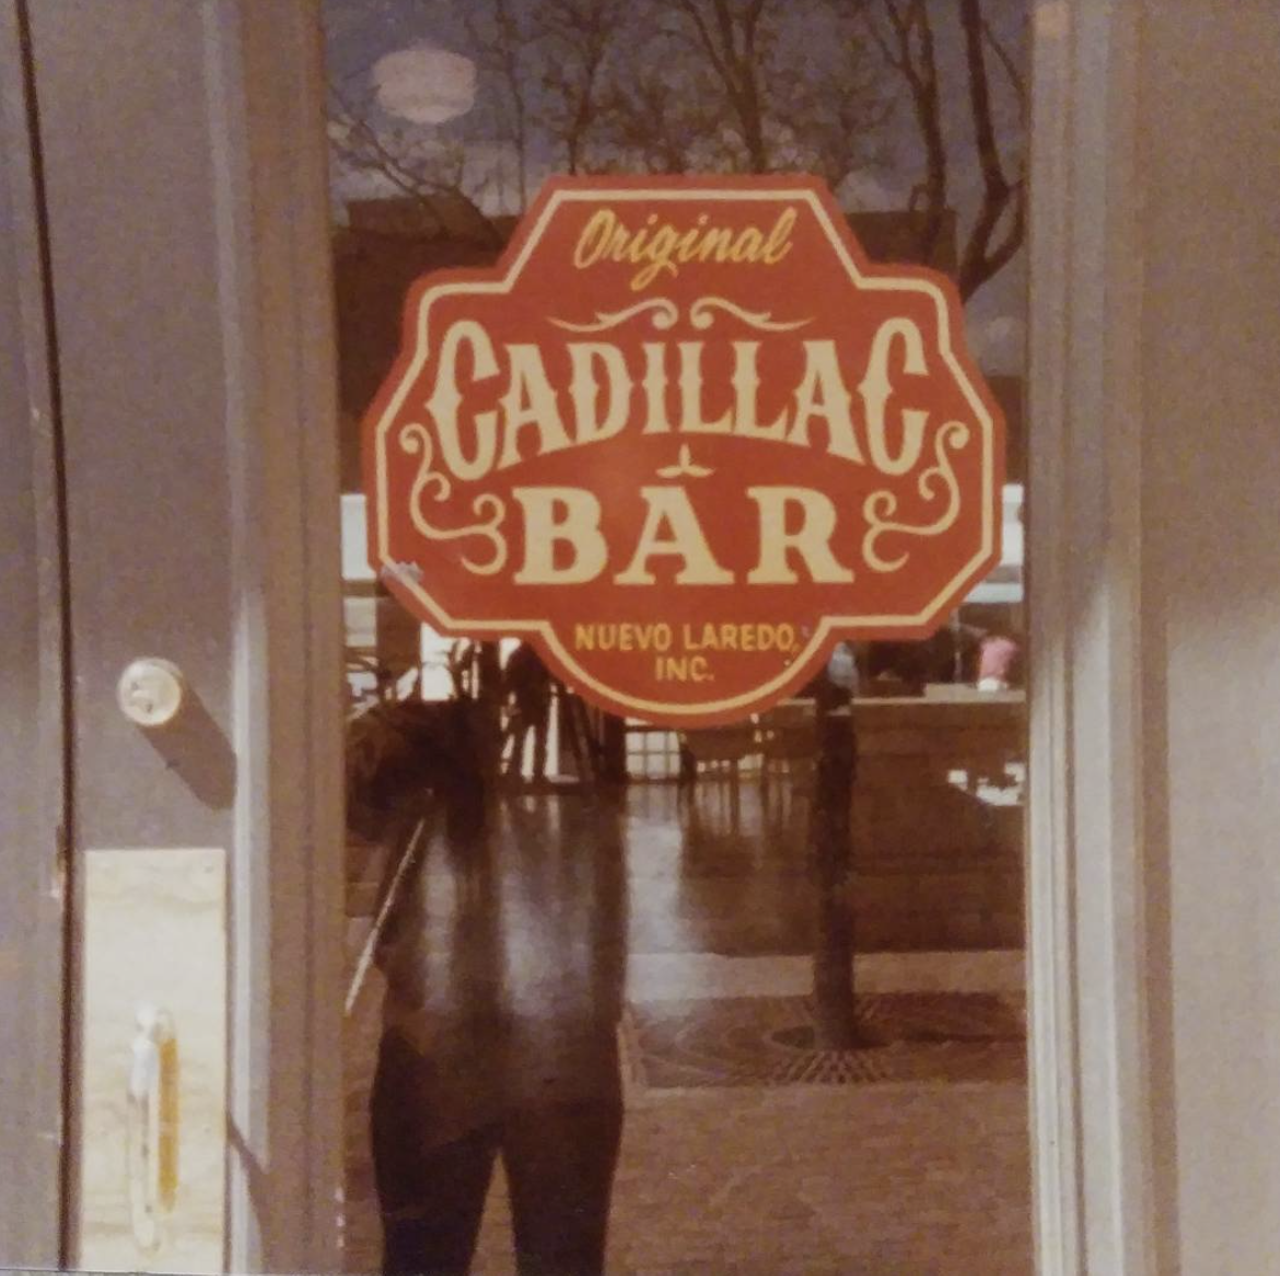 Cadillac Bar
212 S Flores St.
This iconic downtown watering hole closed its doors after serving the courthouse-area community ice cold brews and post-proceedings shots for decades. According to the bar’s website, the building was constructed in the 1870s and features what are said to be the first electric streetlights in Texas.  
Photo via Instagram / texas.is.the.reason